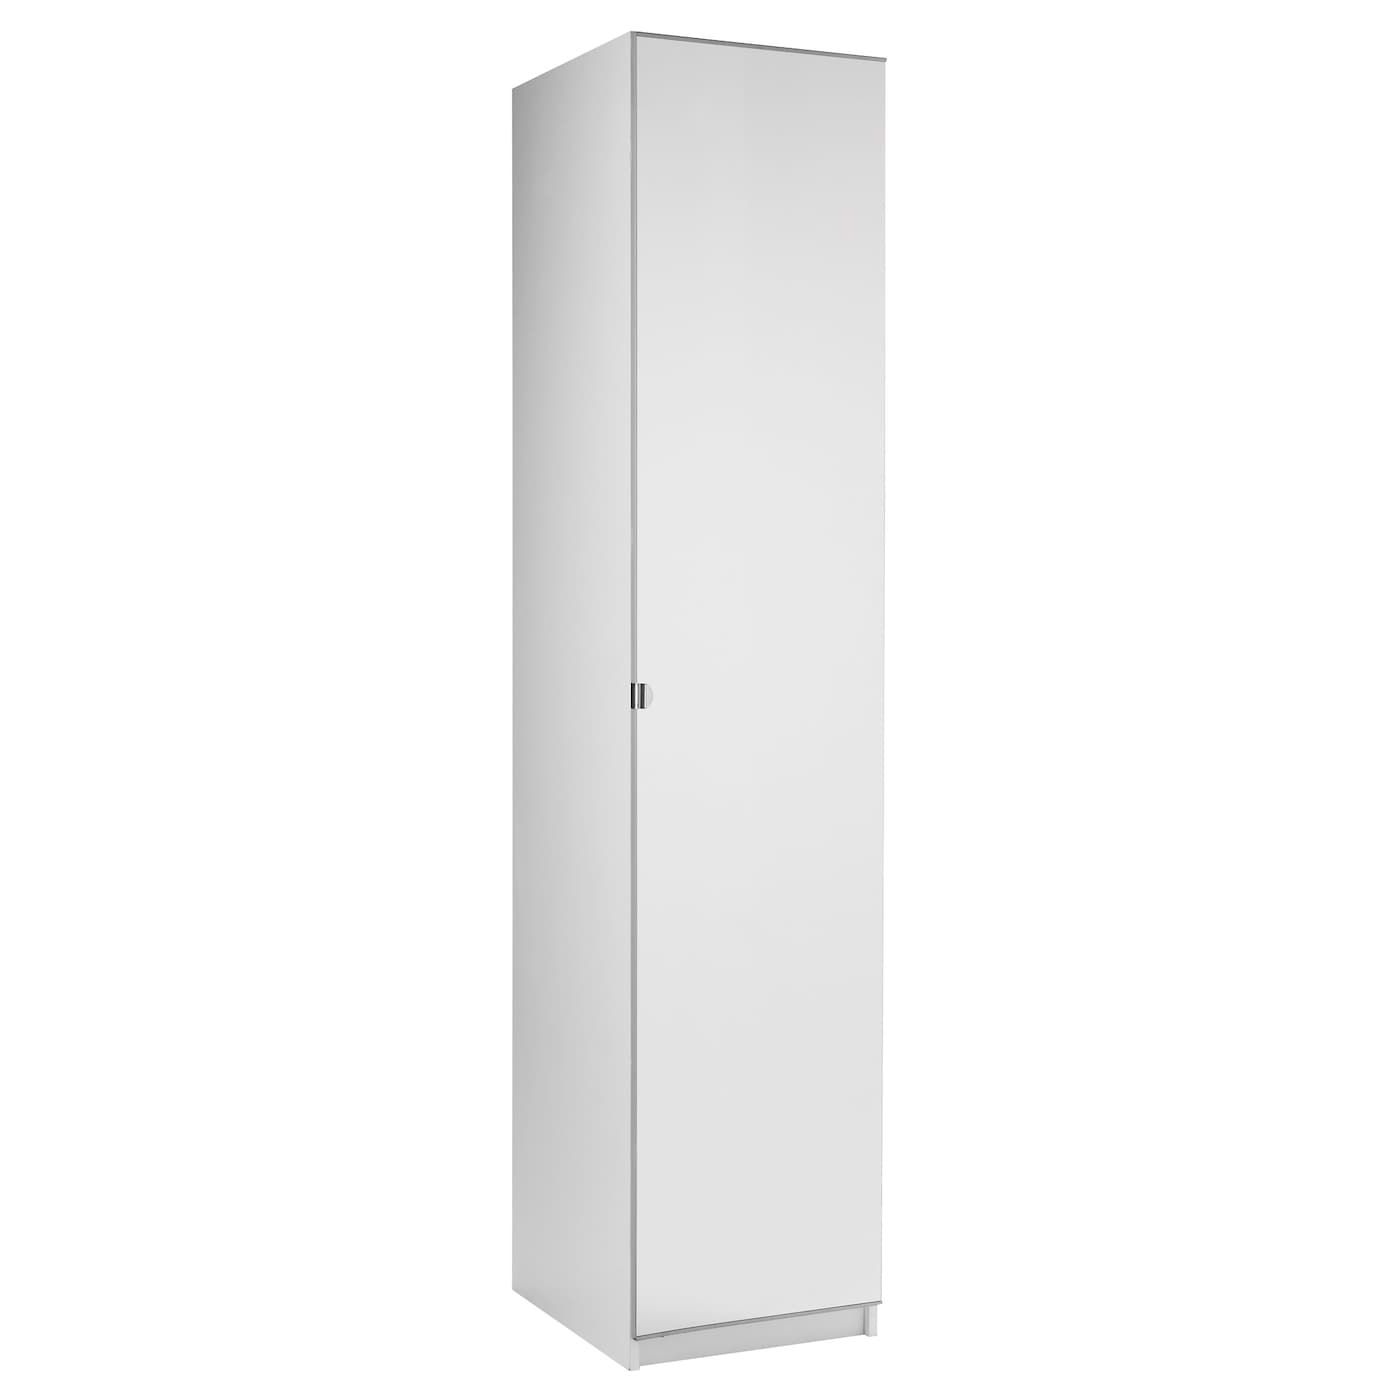 Pax / Vikedal Wardrobe With 1 Door, White/mirror Glass, 50x60x236 Cm – Ikea Within One Door Mirrored Wardrobes (Gallery 3 of 20)